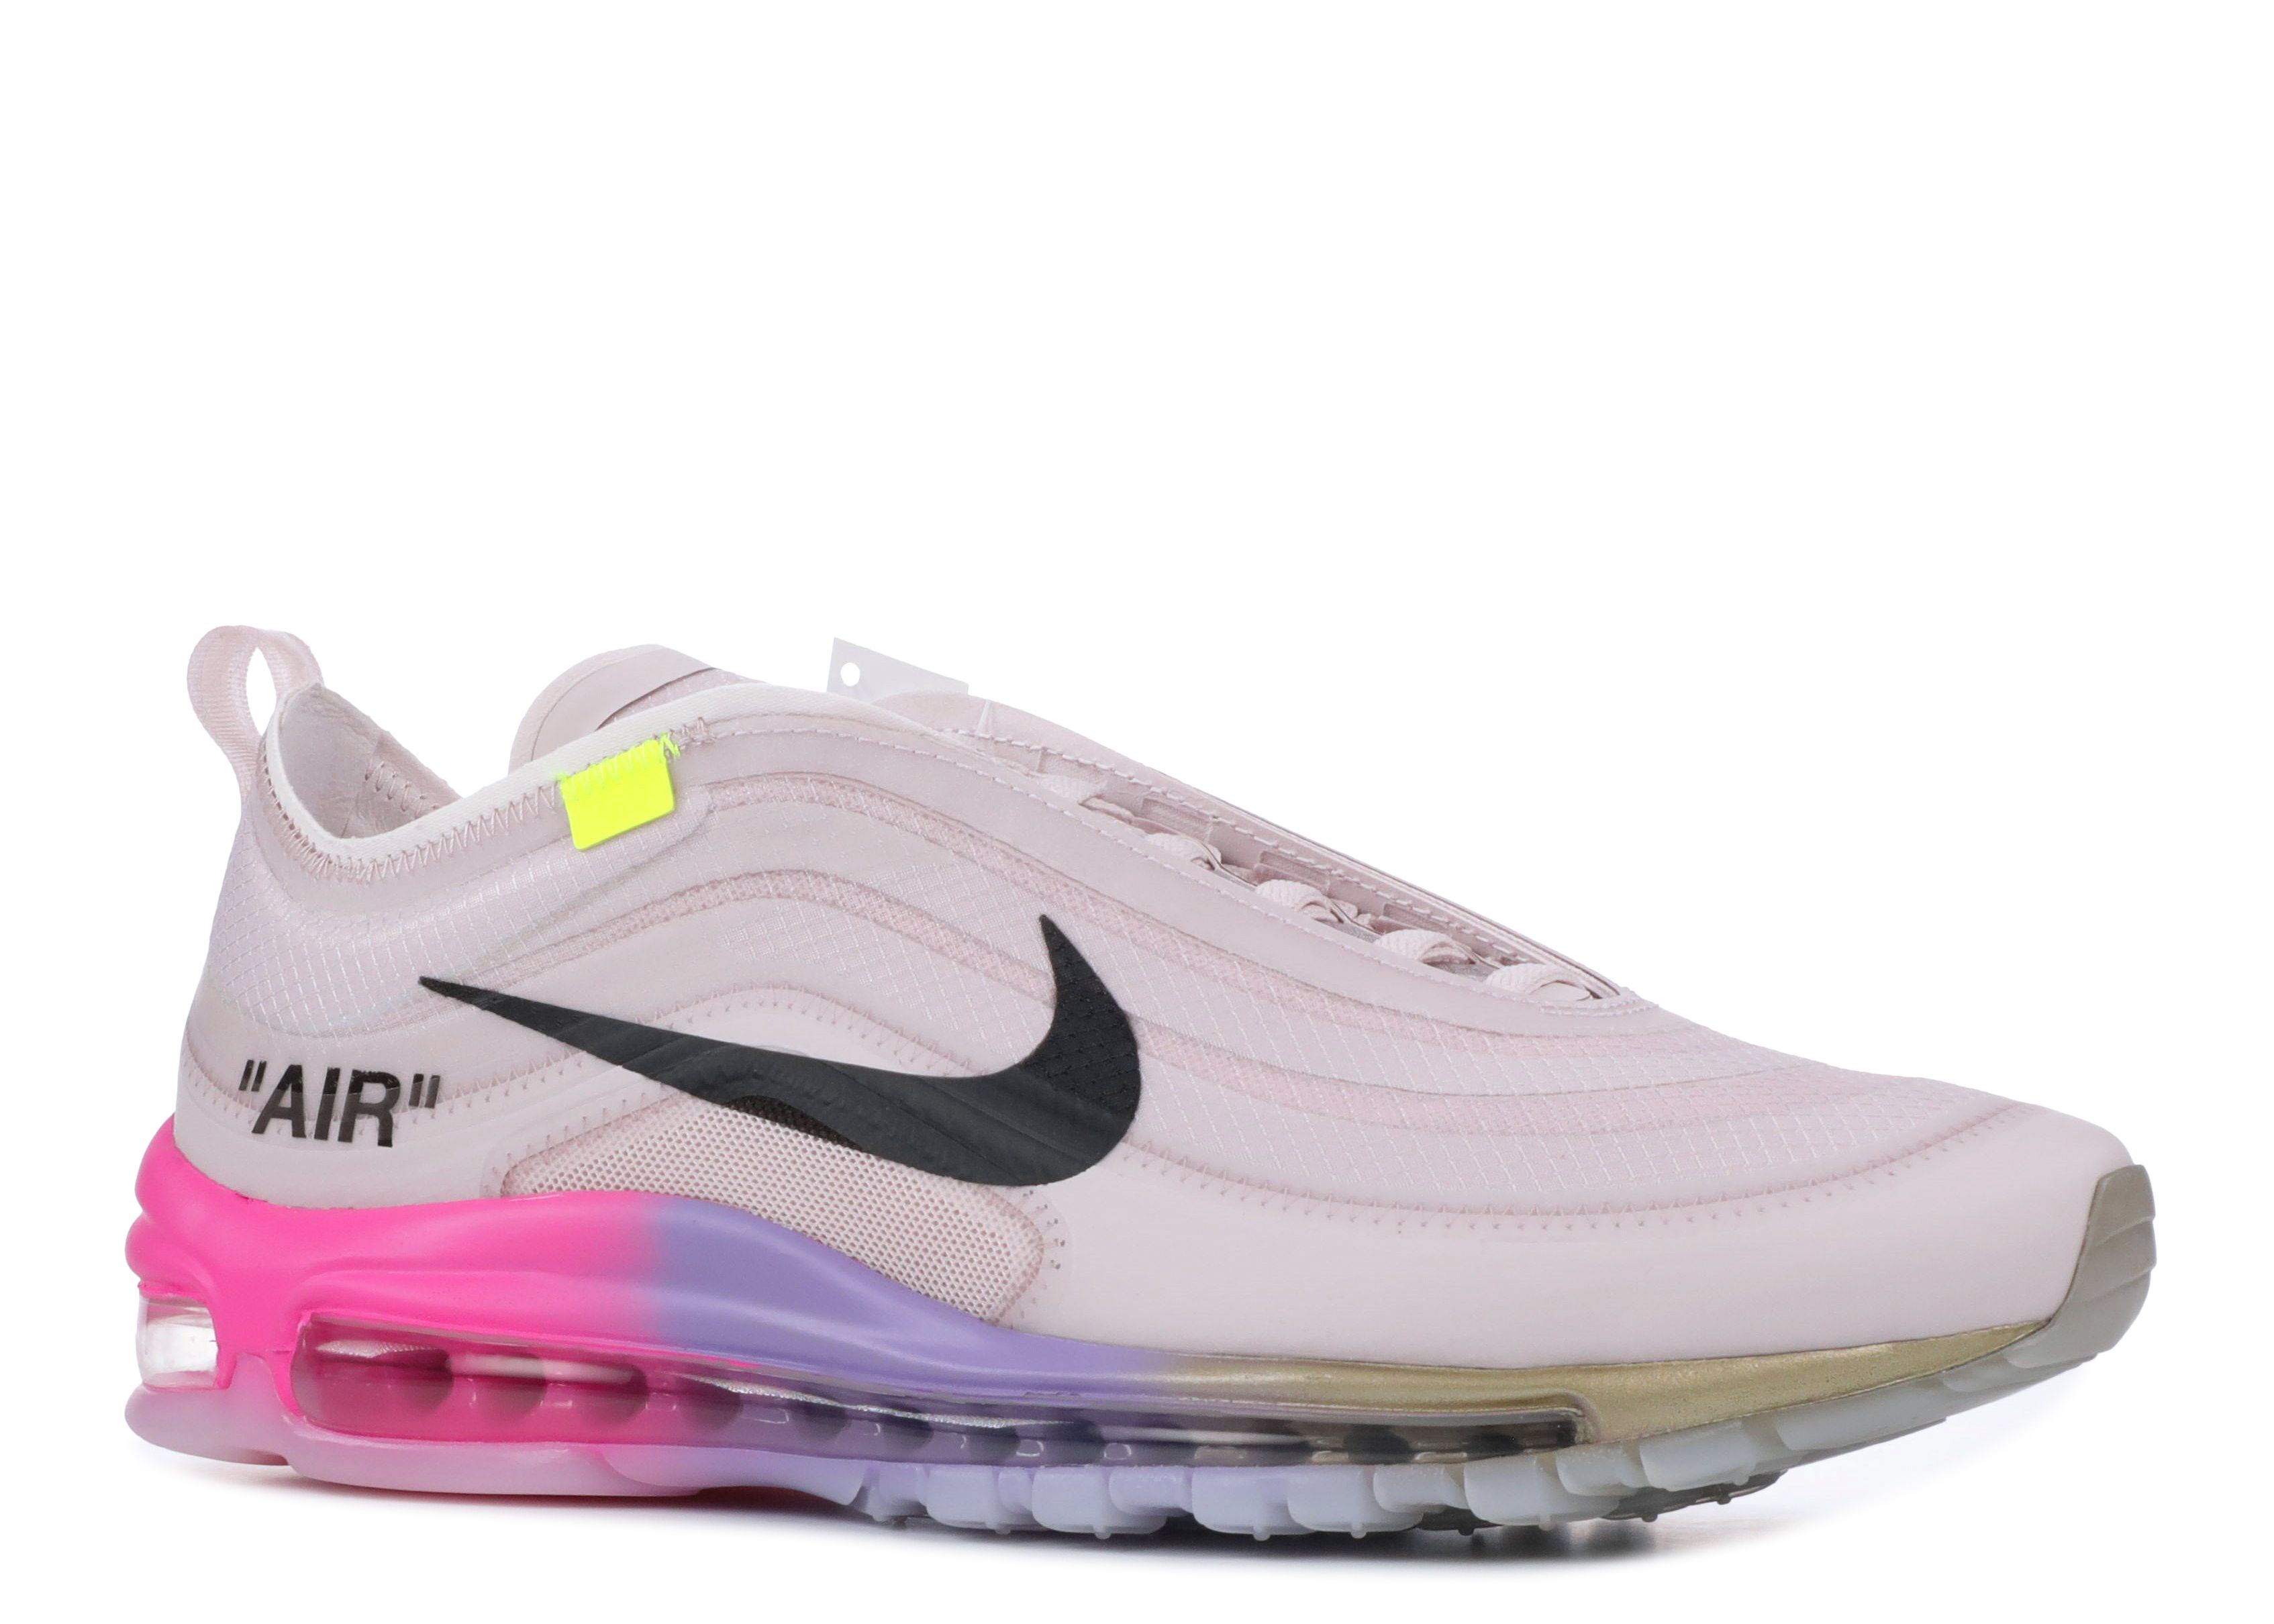 Serena Williams x Off-White x Air Max 97 OG 'Queen'